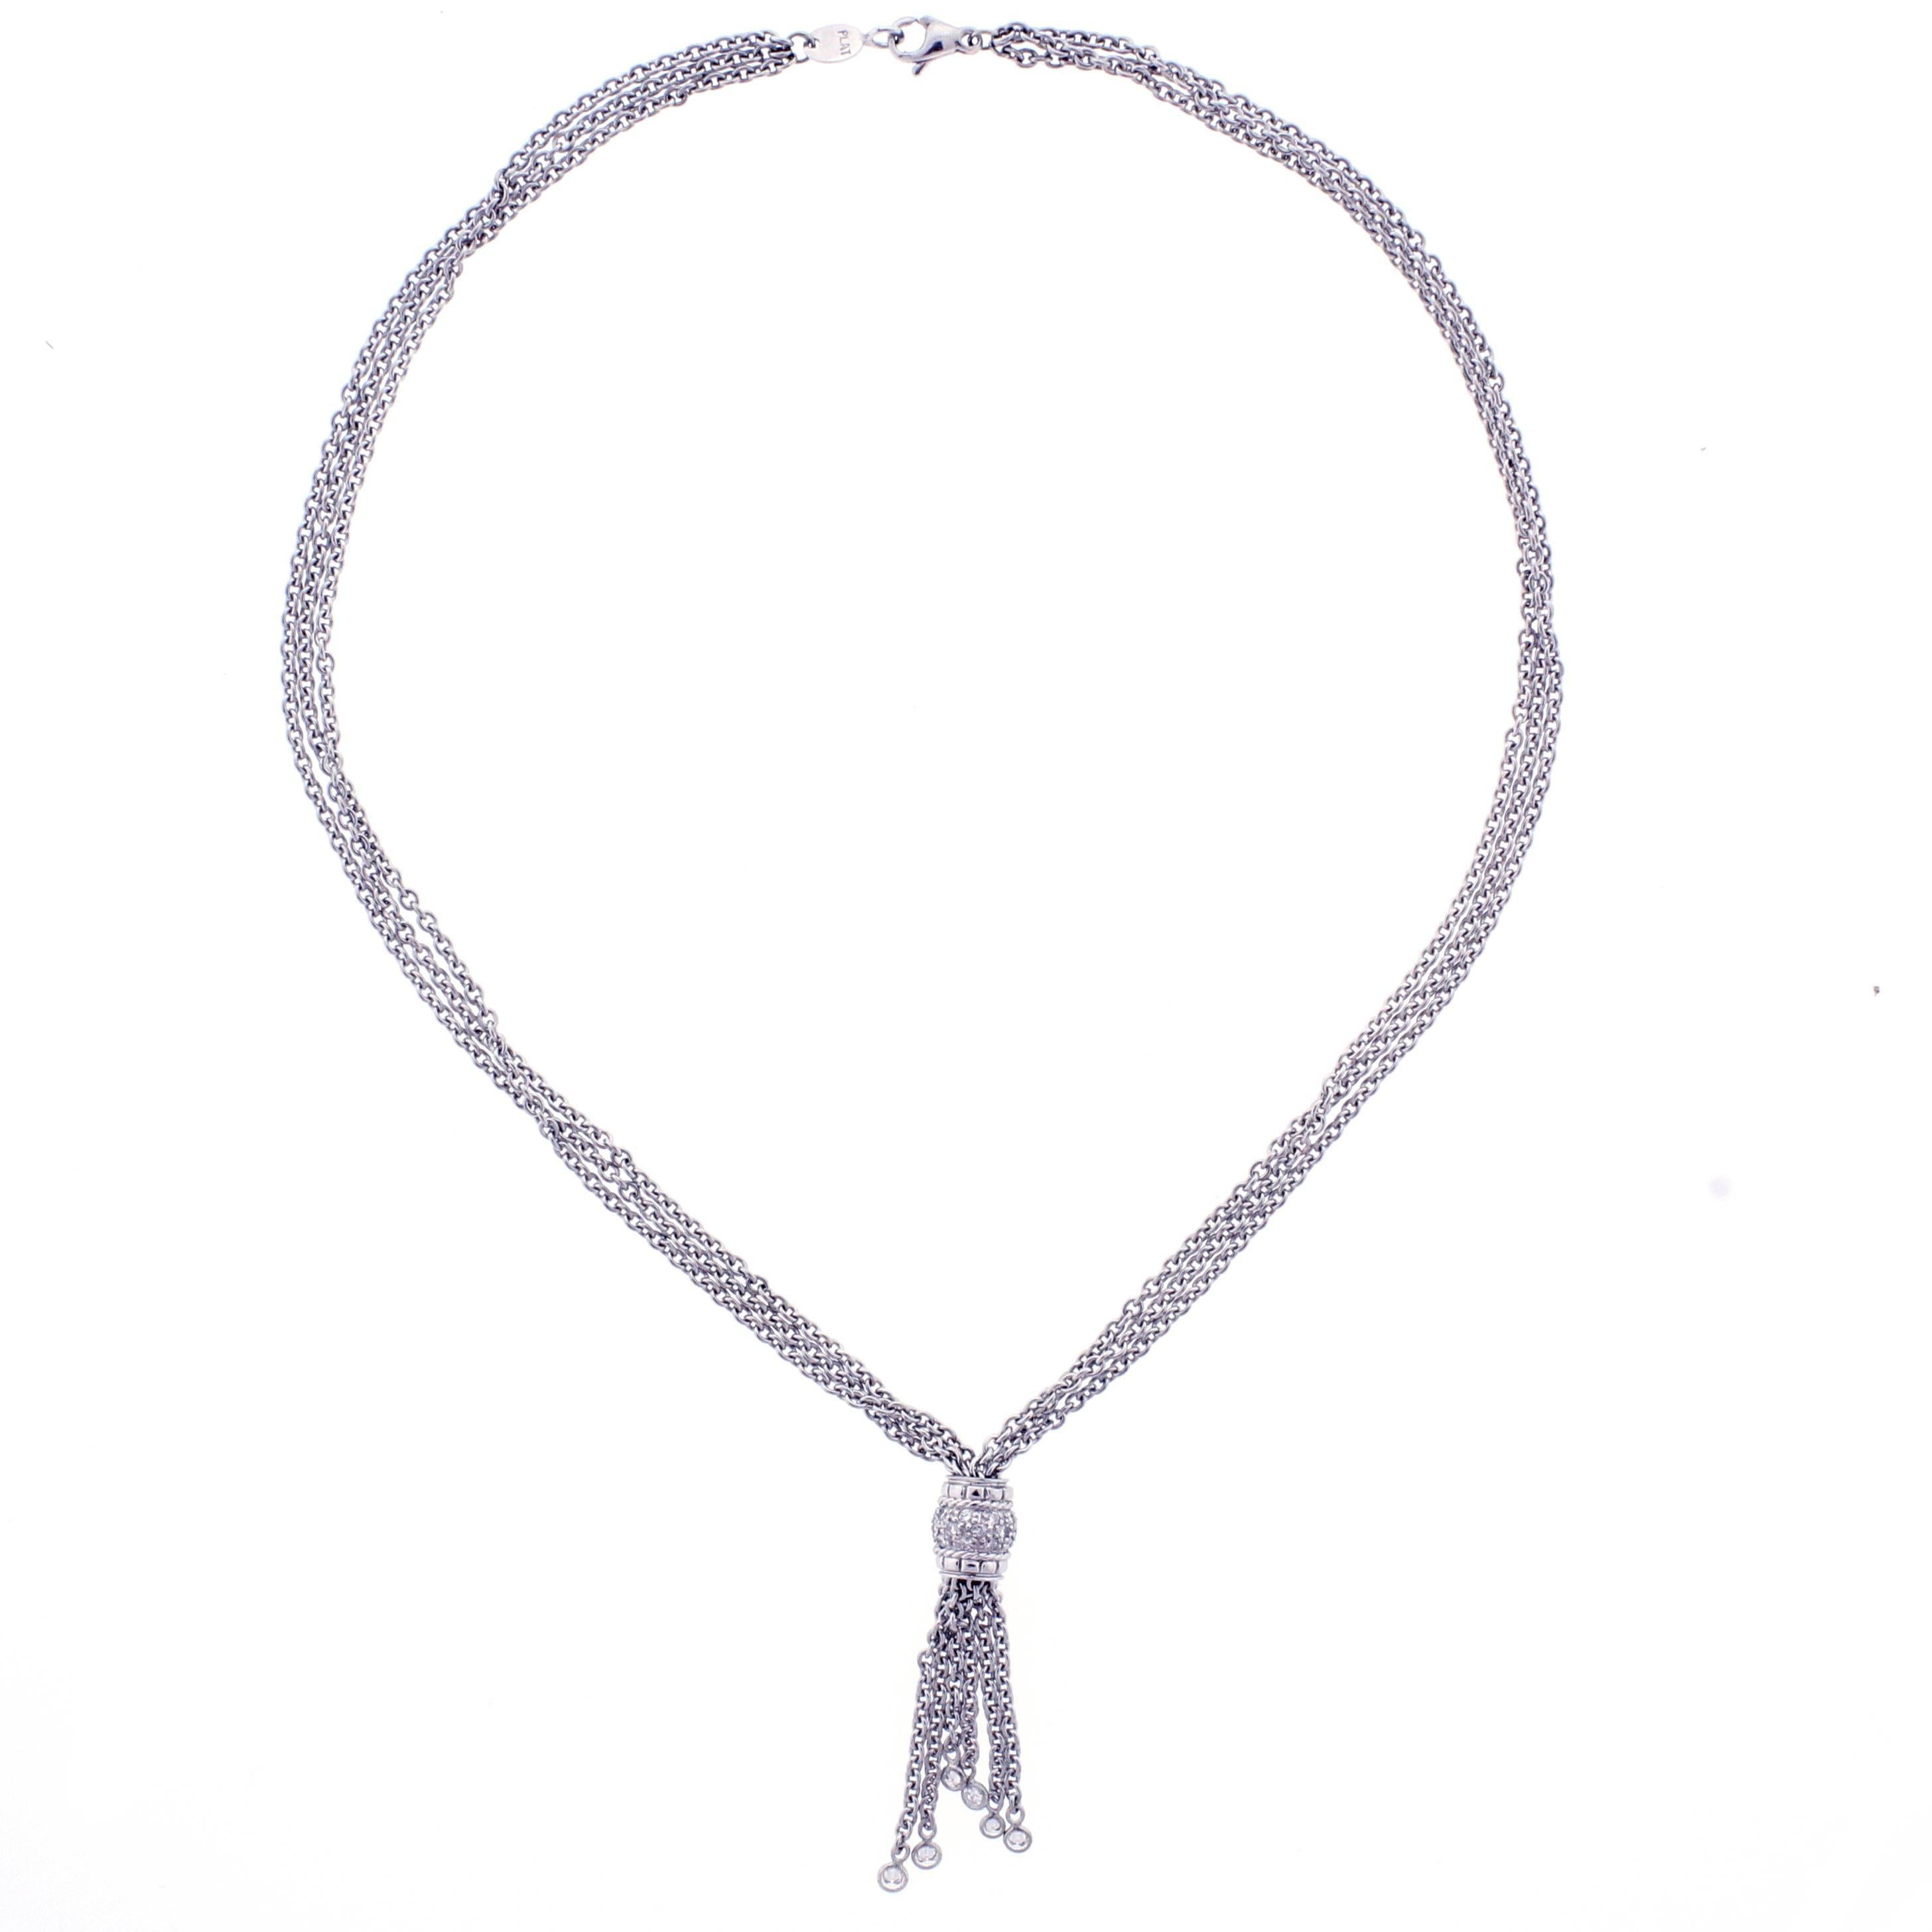 From award winning fine jewelry designer Penny Preville. a diamond tassel necklace. the necklace is comprised of three  strands of platinum and 32 brilliant diamonds weighing one carat. 16 inches